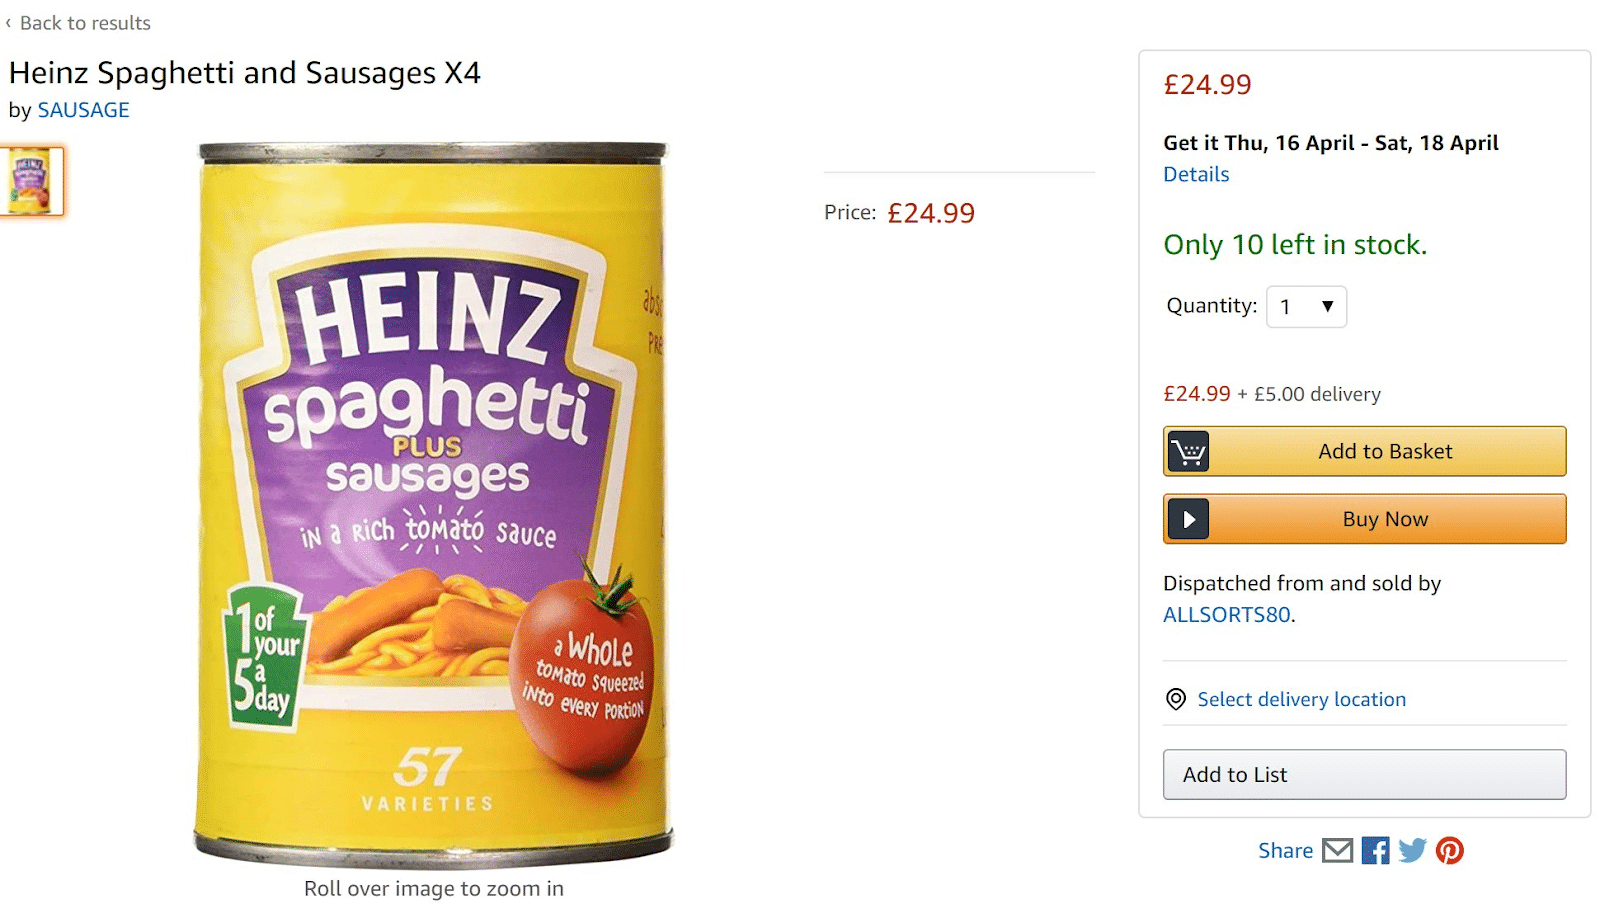 The price for a 4-pack of Heinz Spaghetti Plus Sausages went up to 24 pounds versus the normal price of 4 pounds